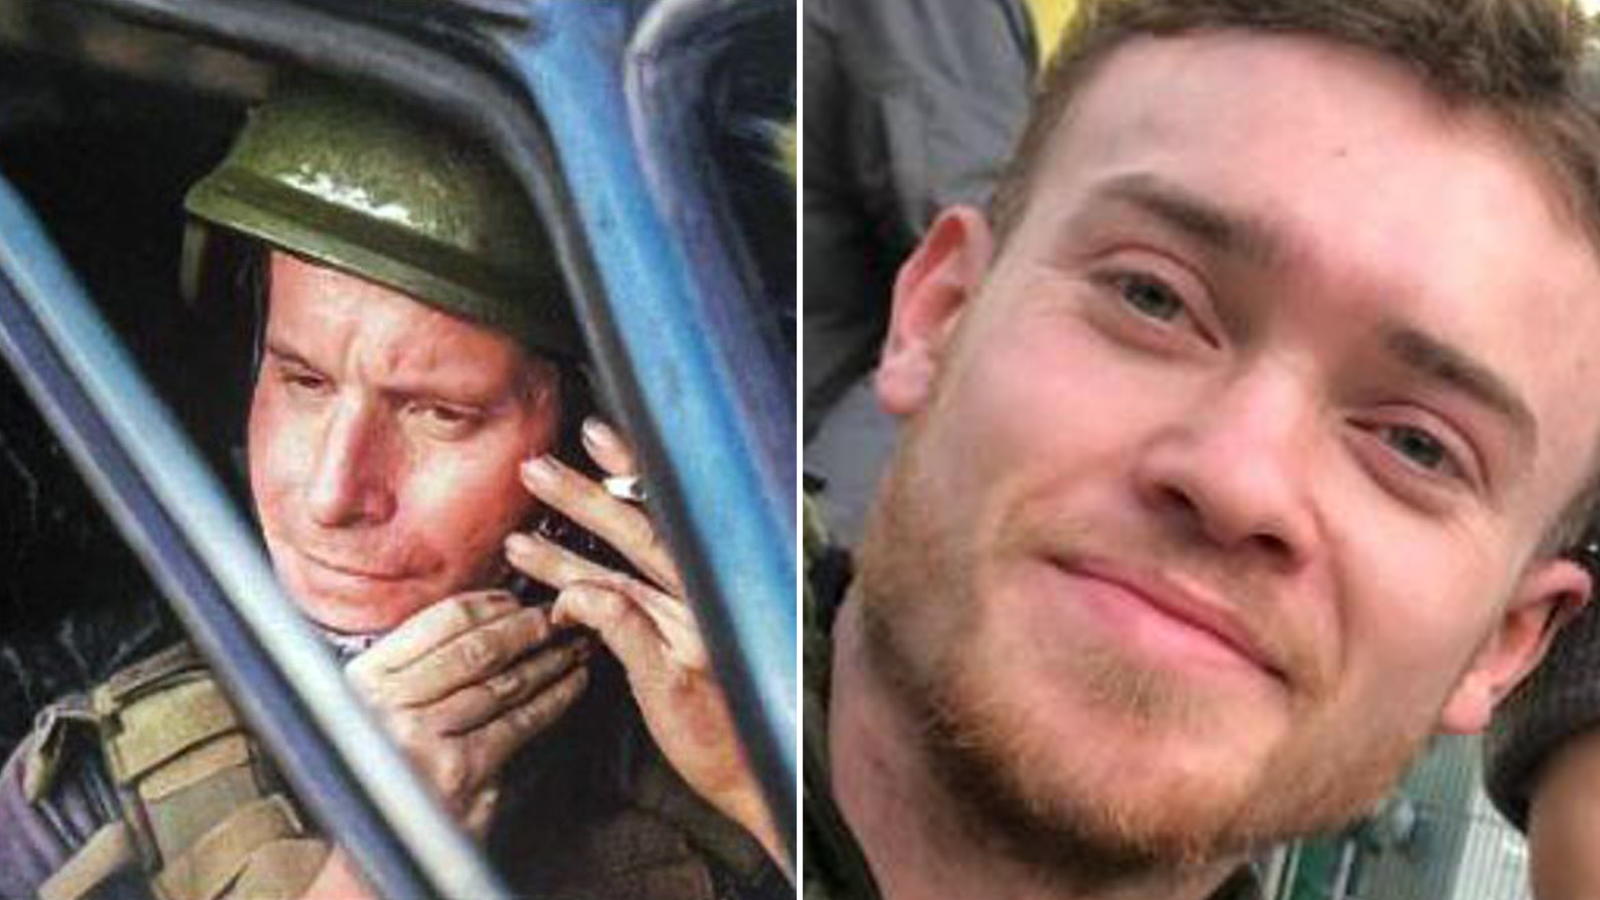 Chris Parry and Andrew Bagshaw: British nationals killed 'attempting humanitarian evacuation from Soledar', family statement says